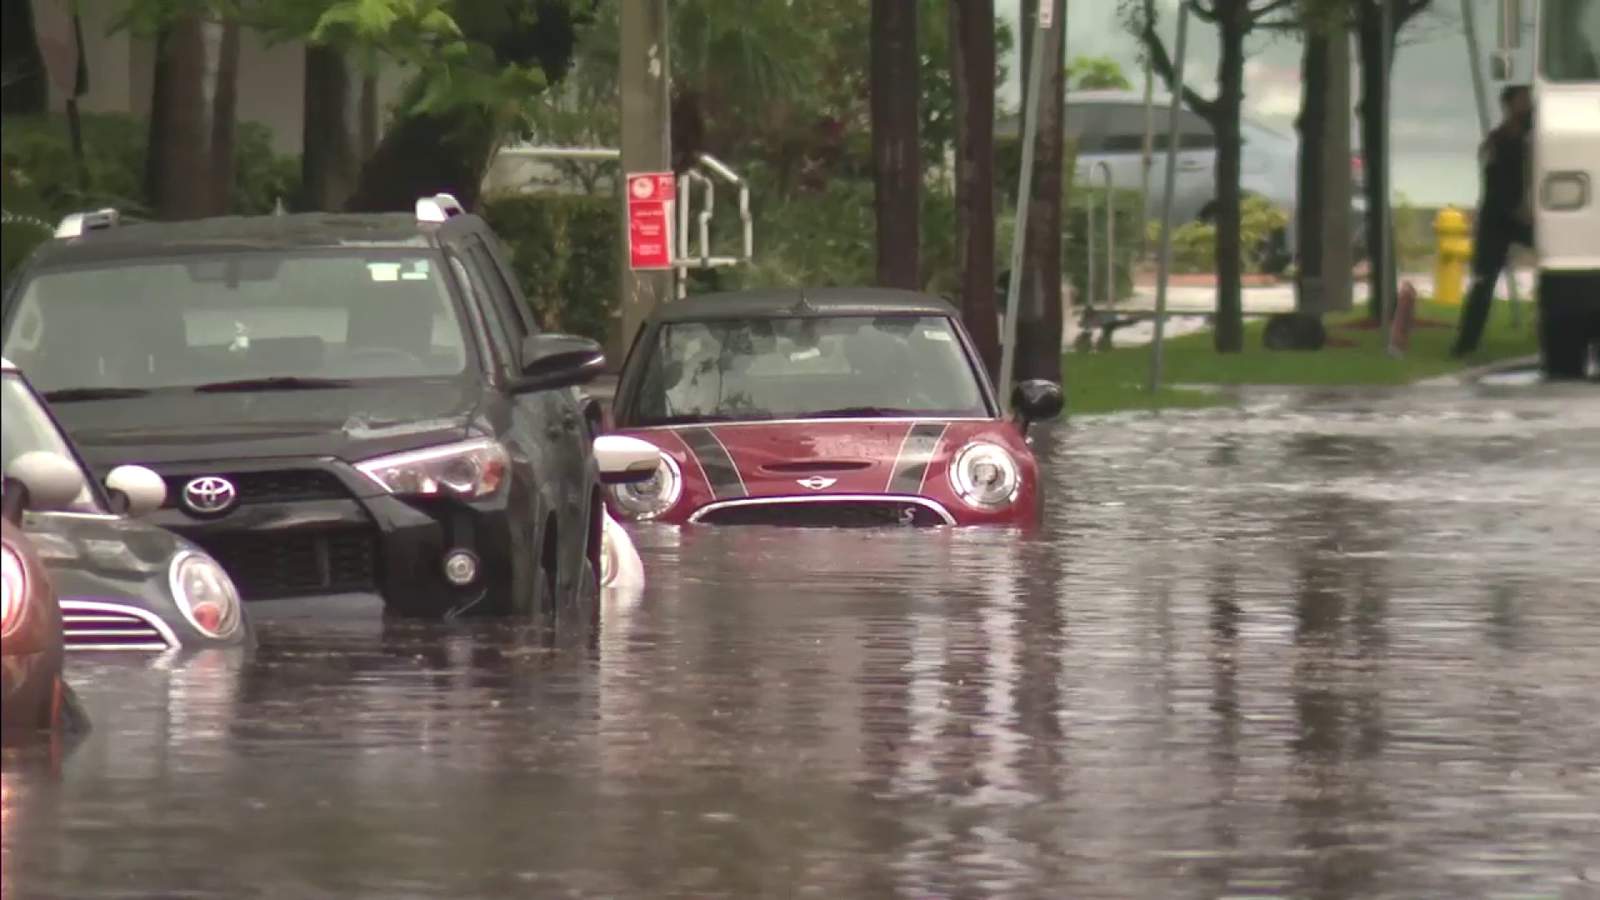 Heavy rains bring flash floods to parts of Miami-Dade and Broward, causing daily commuters